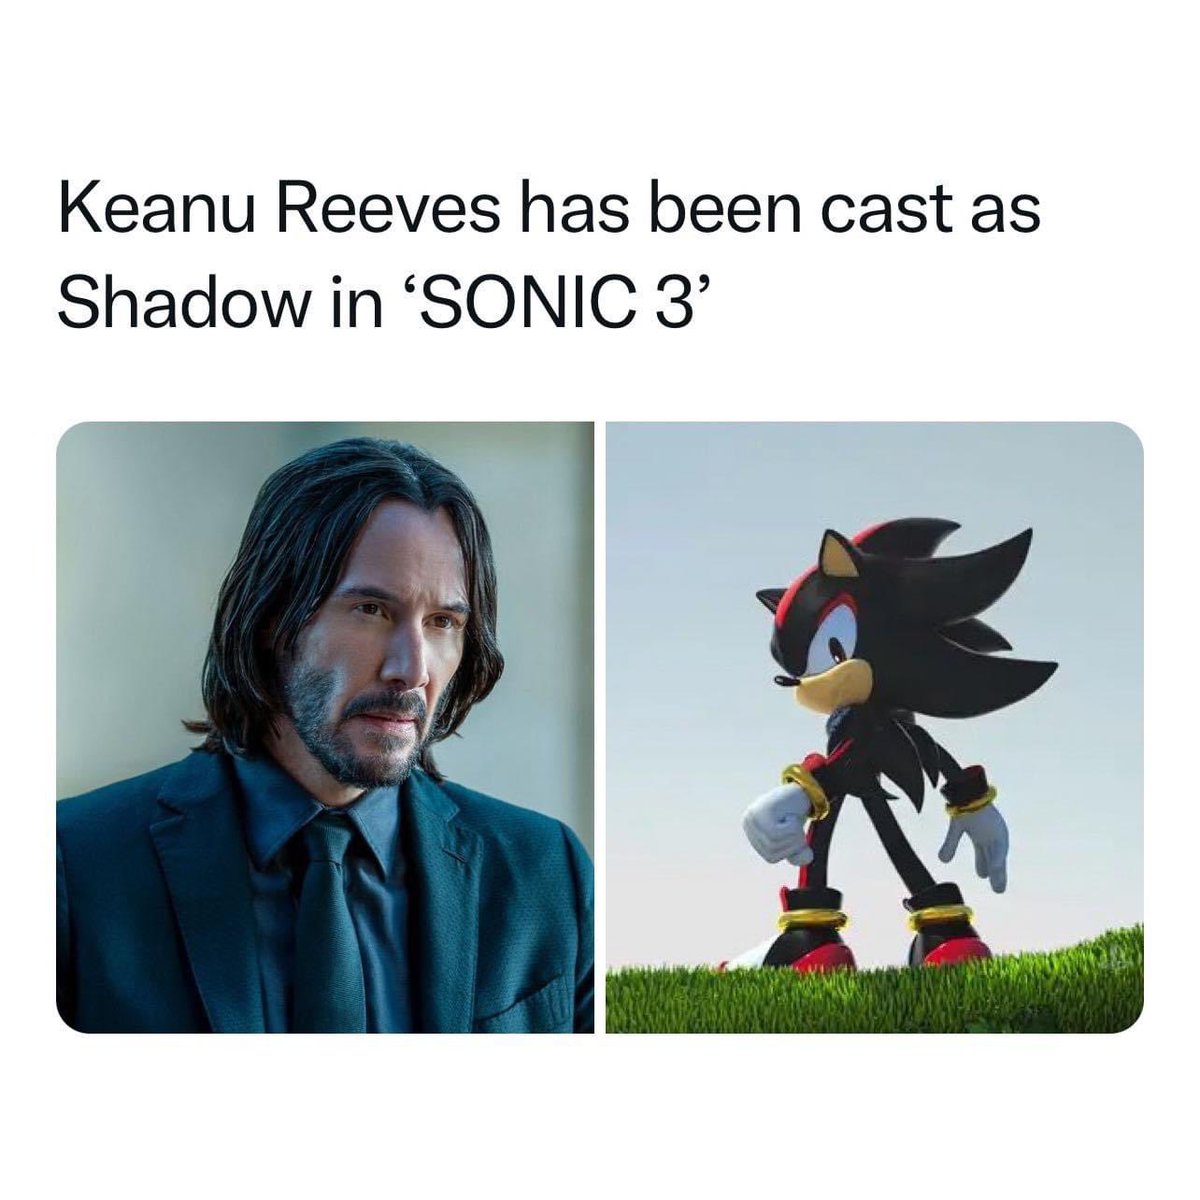 Perfection! 😎👌

How does everyone feel about this? 🤔

.

#Sonic3 #ShadowTheHedgehog #sega #KeanuReeves